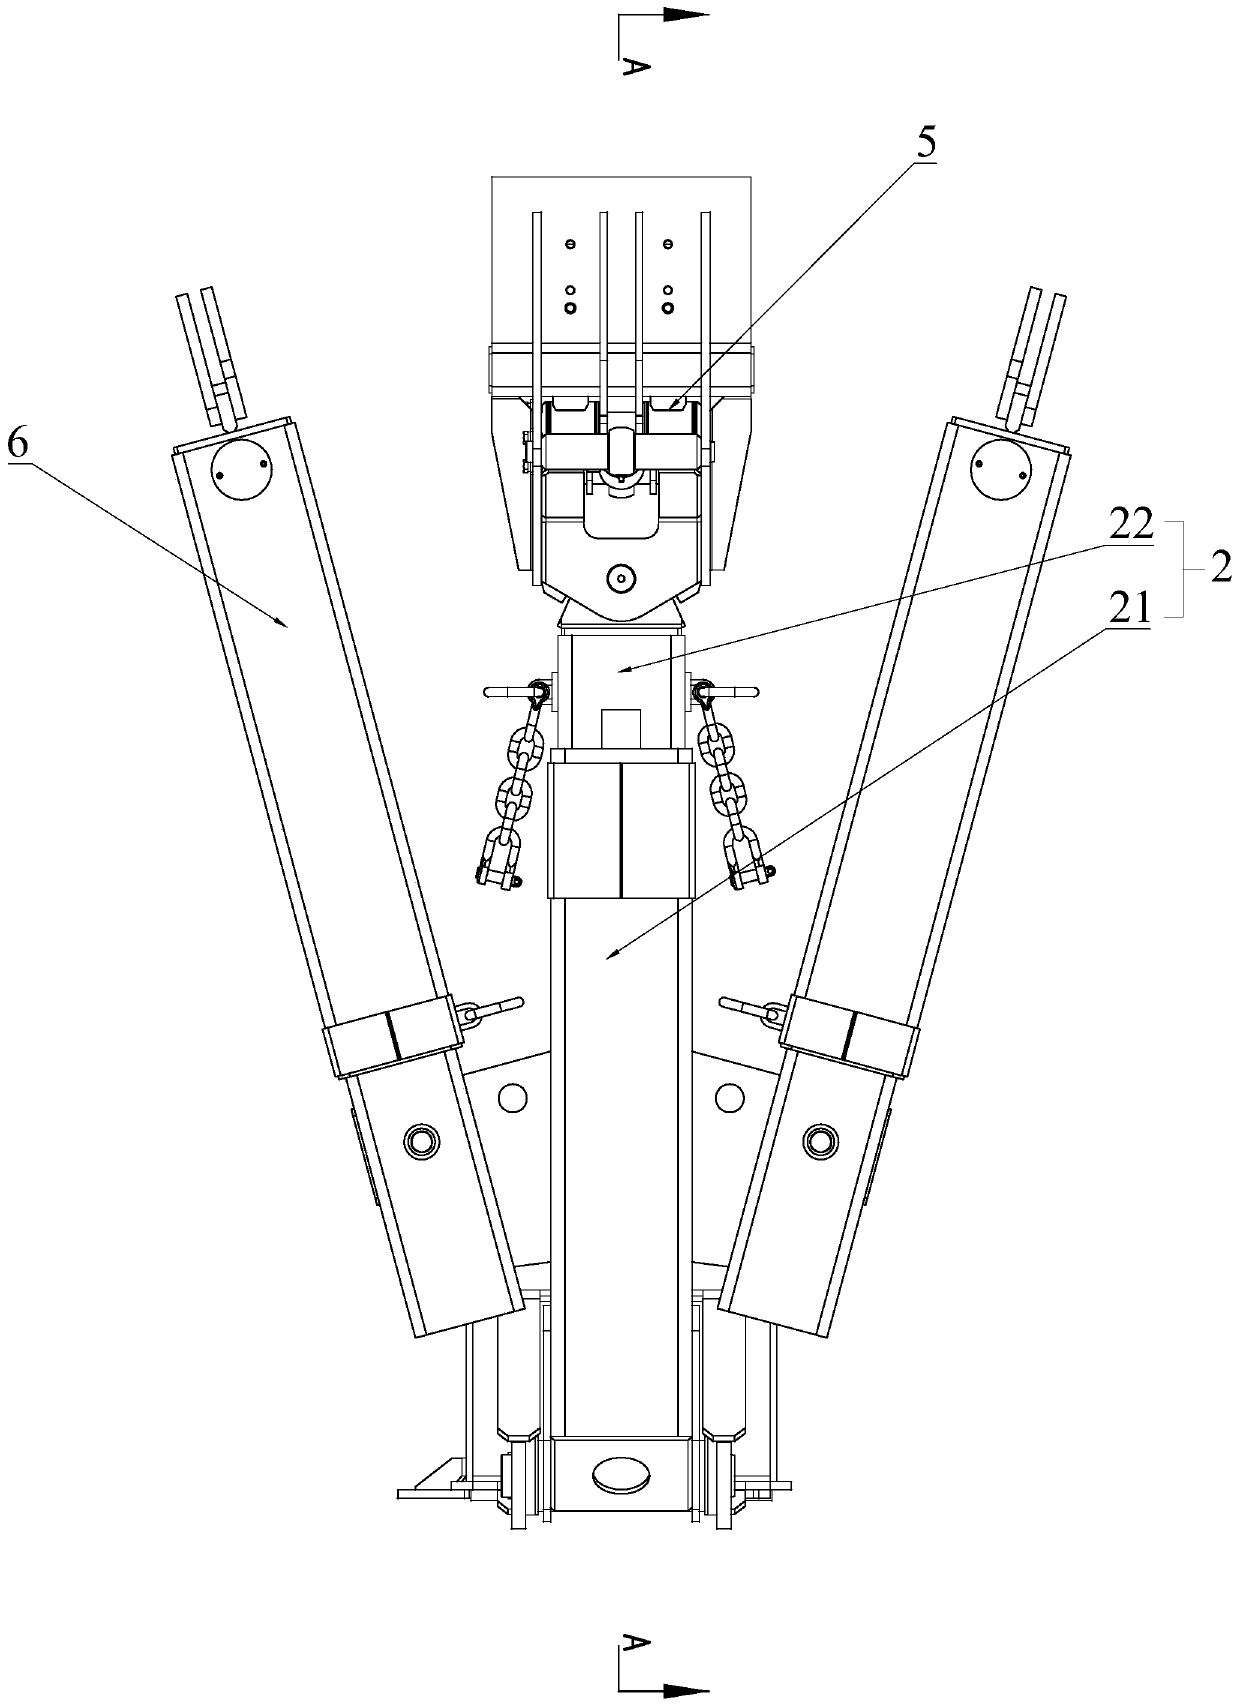 Drive structure, main mechanical arm and auxiliary mechanical arm